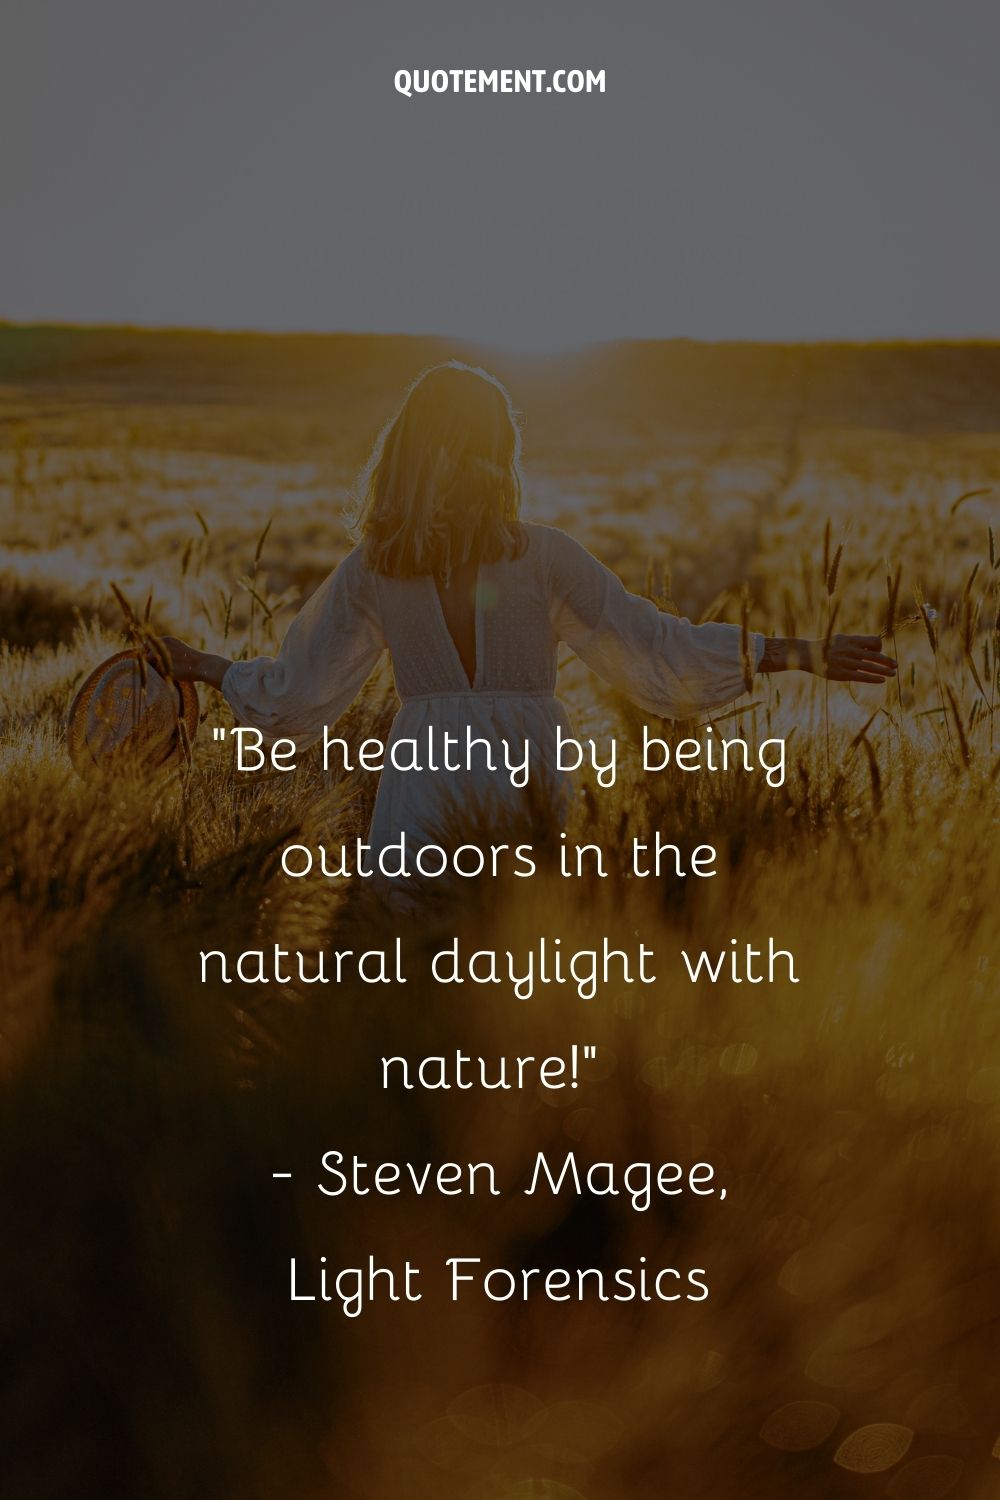 Be healthy by being outdoors in the natural daylight with nature!